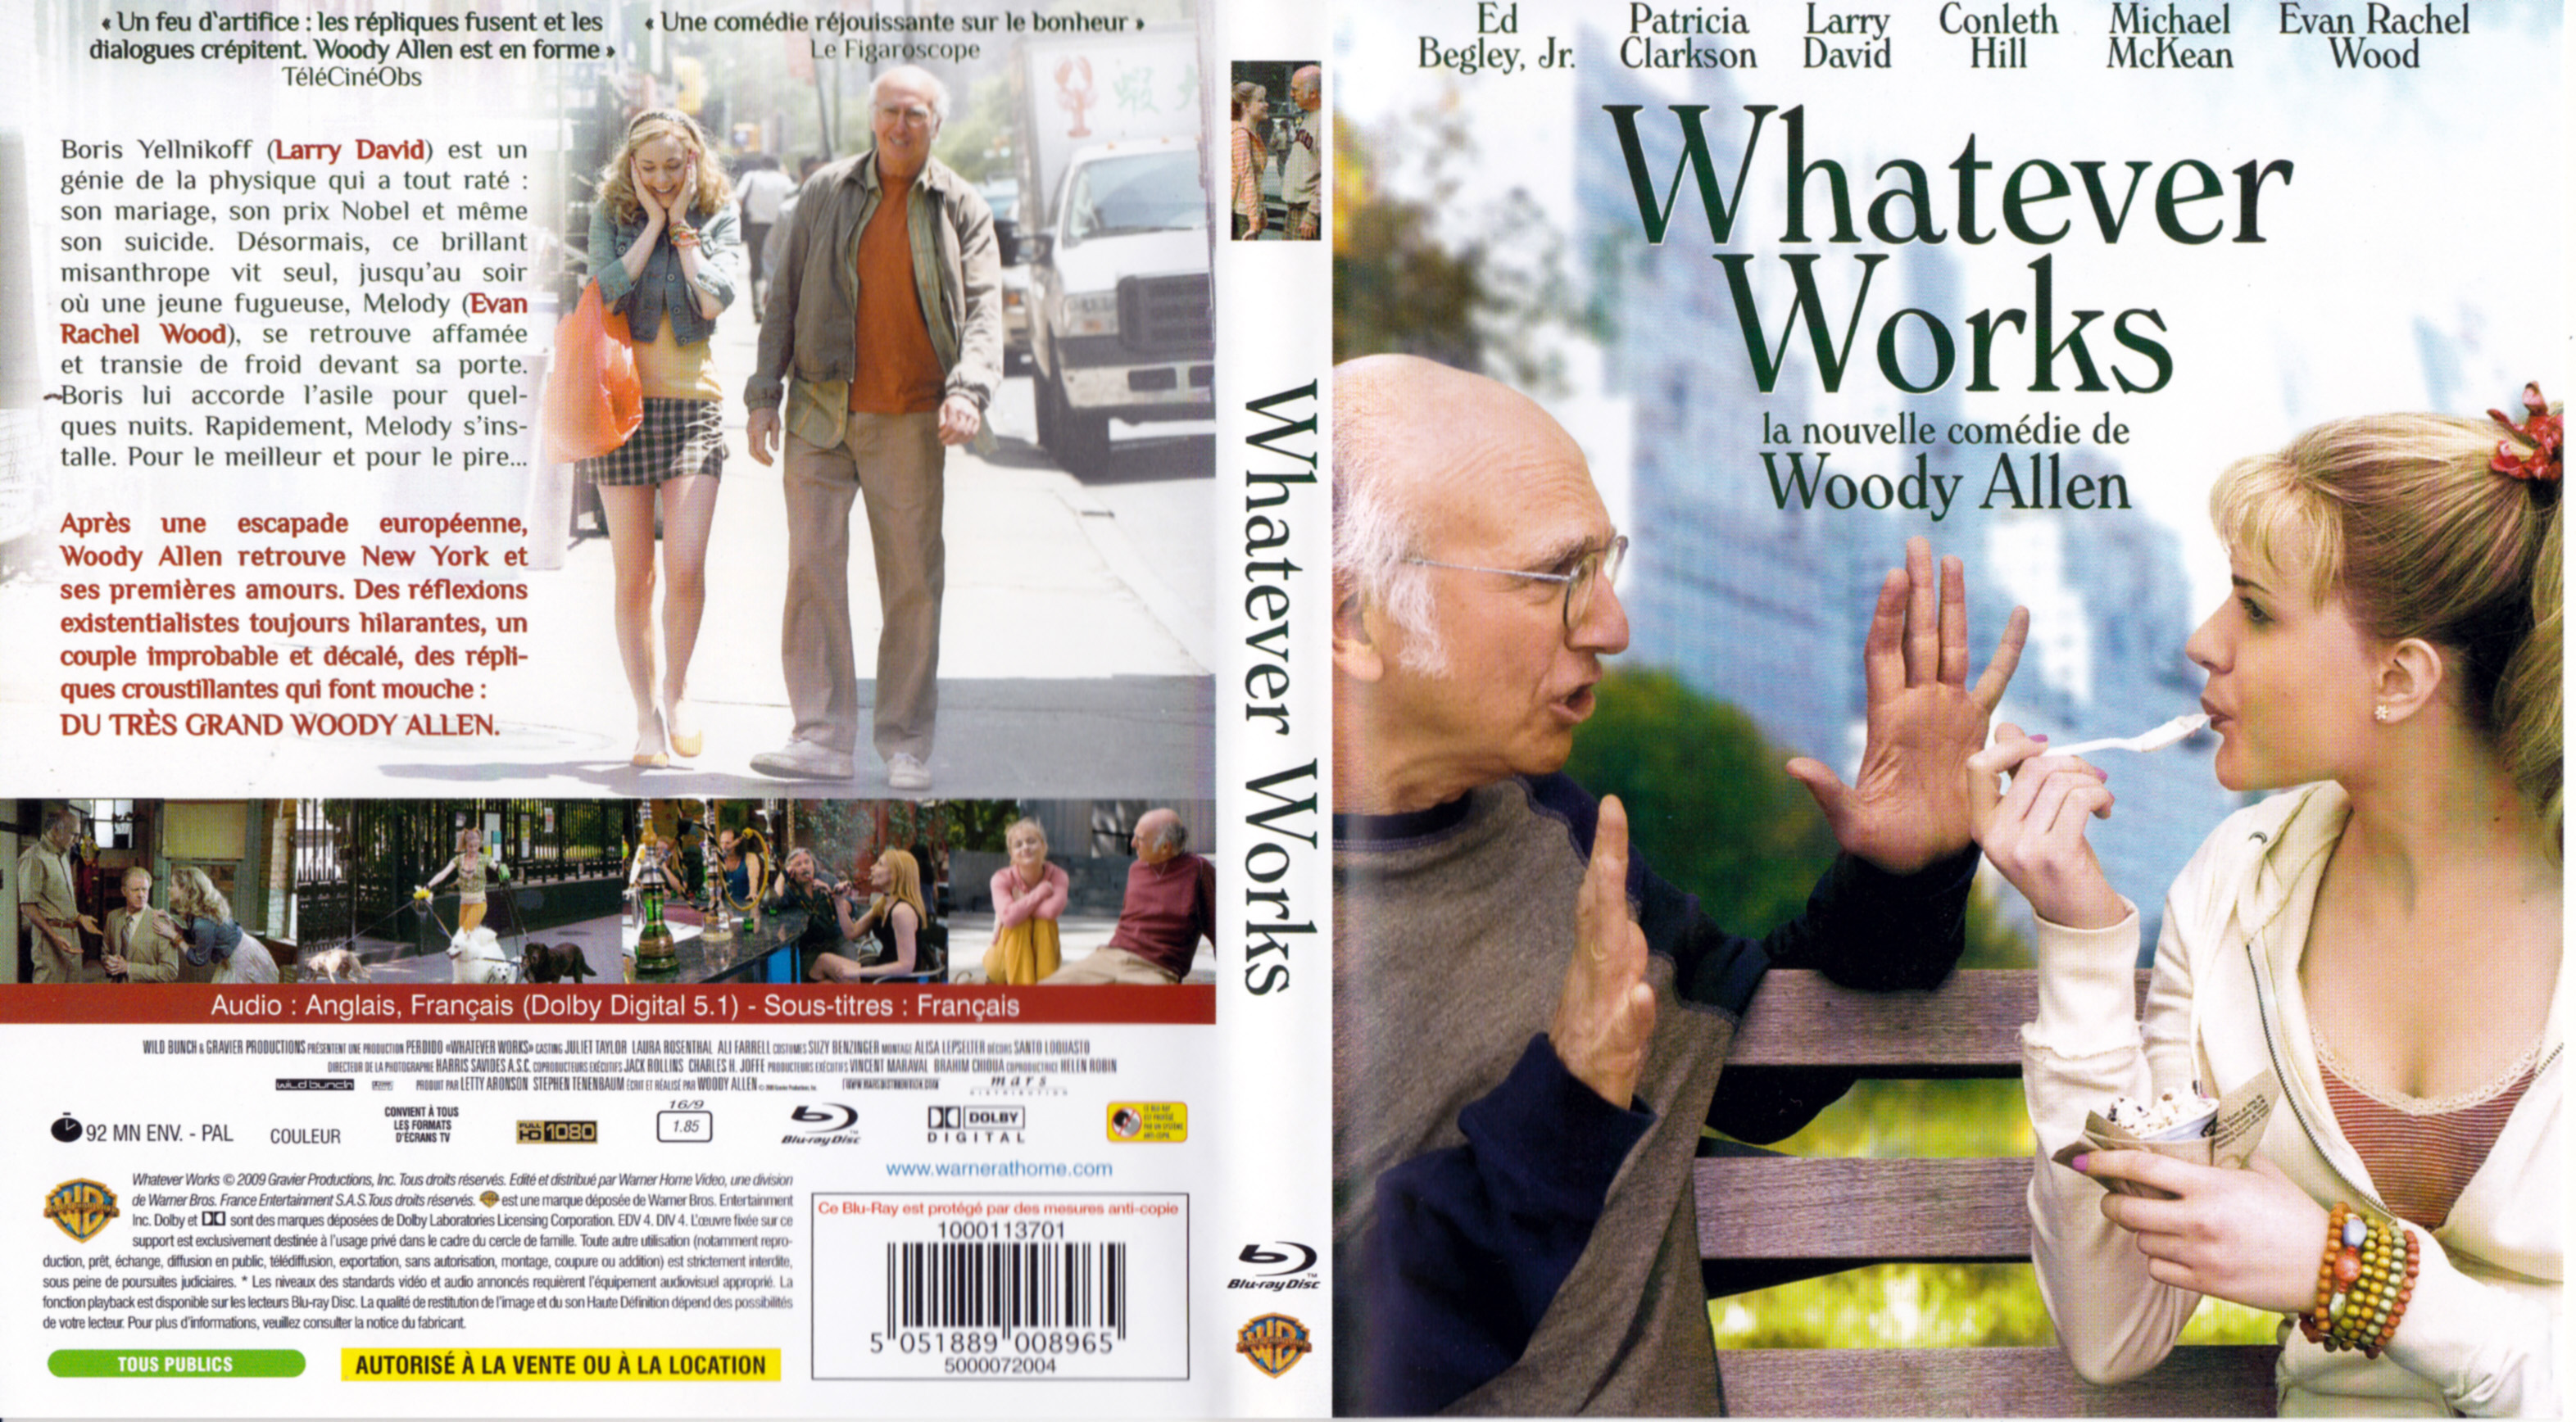 Jaquette DVD Whatever Works (BLU-RAY)